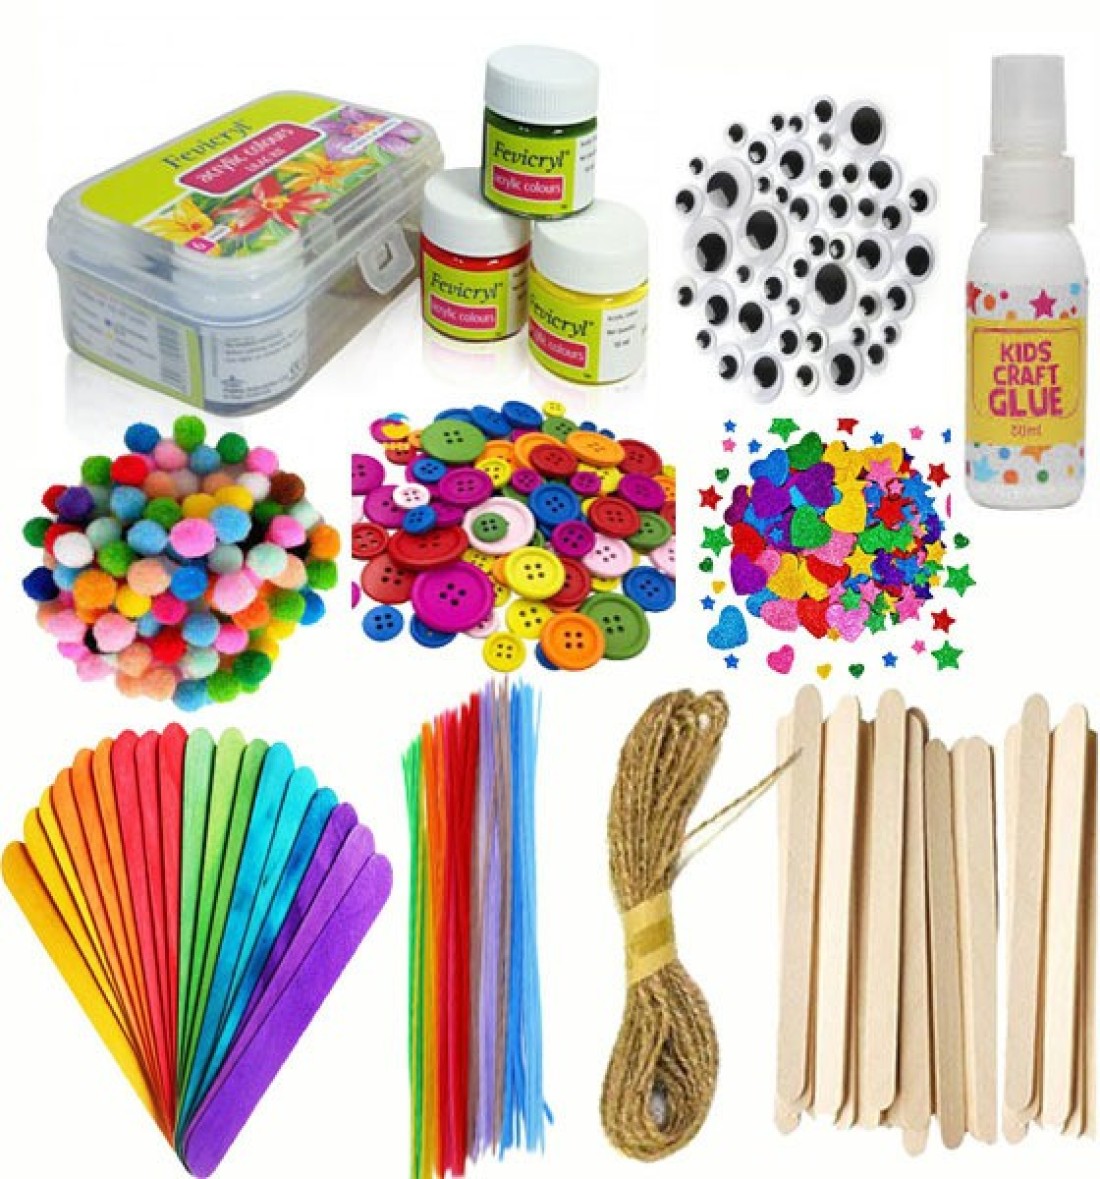 anjanaware Activity Kit All-In-One DIY Craft Set for Kids from 5